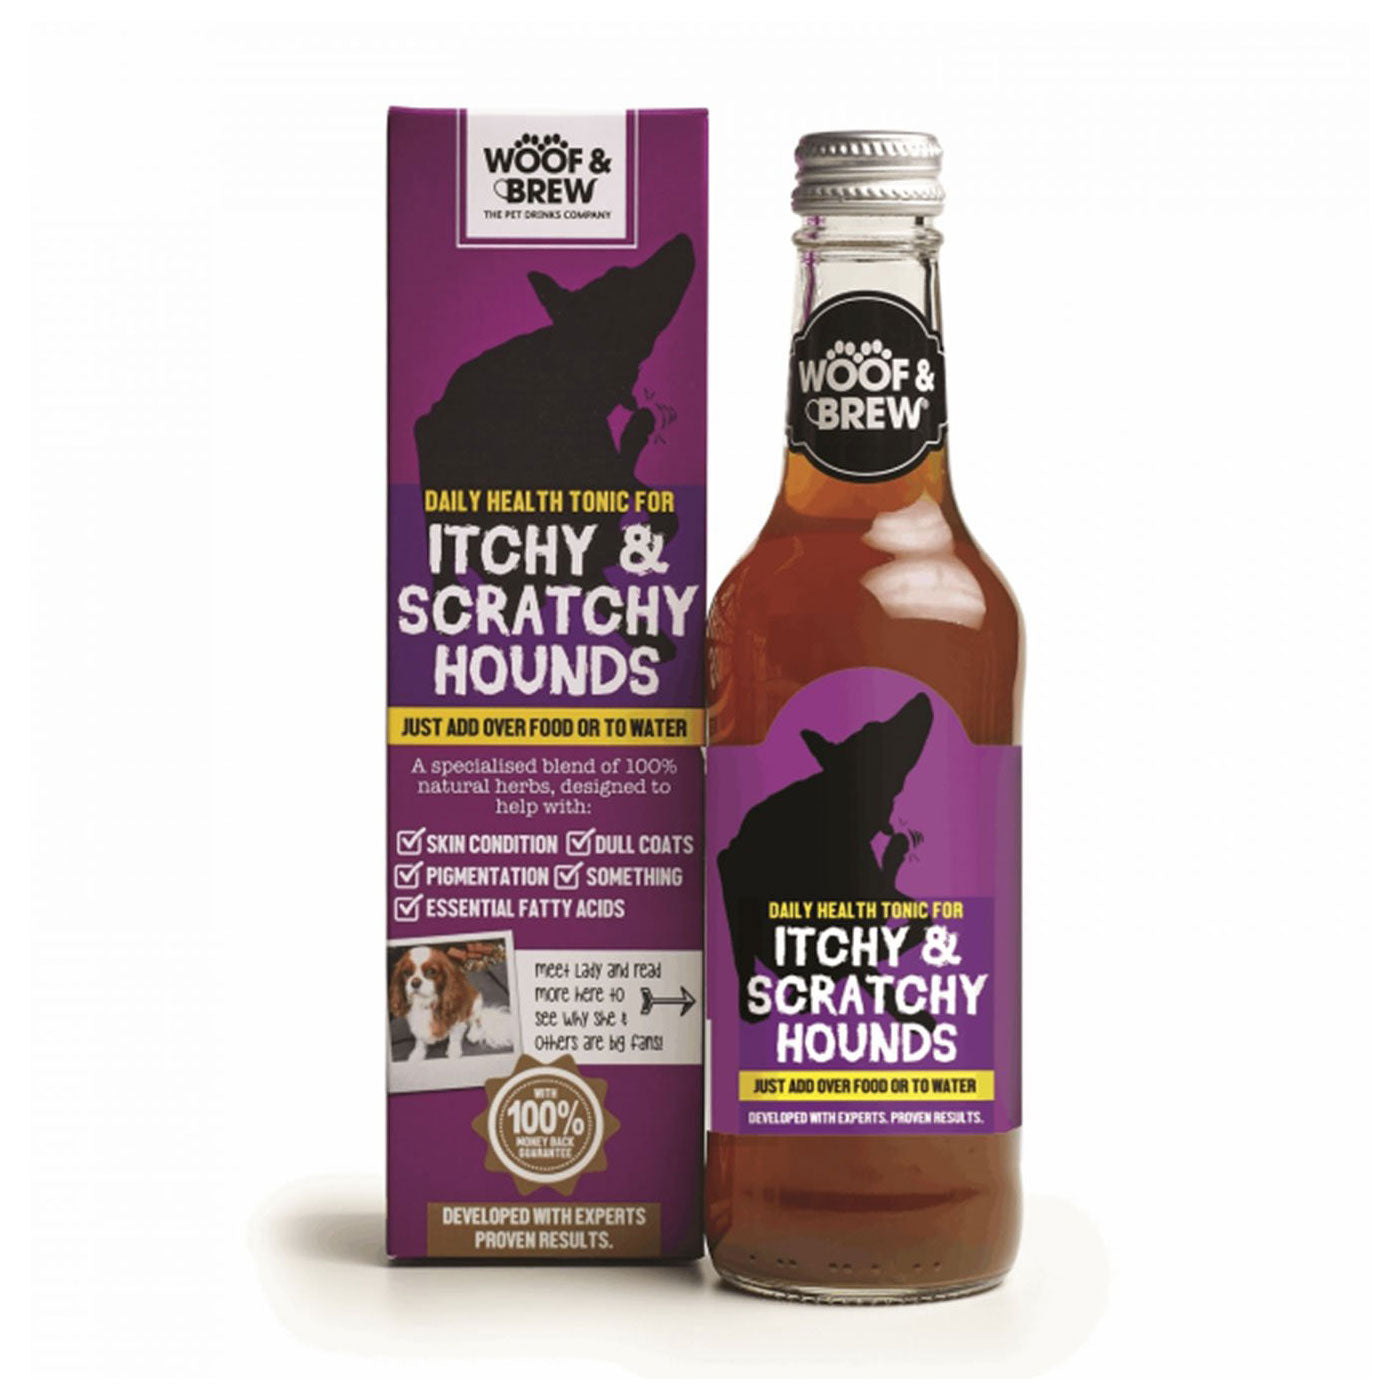 Woof & Brew Itchy and Scratchy Hound Herbal Tonic